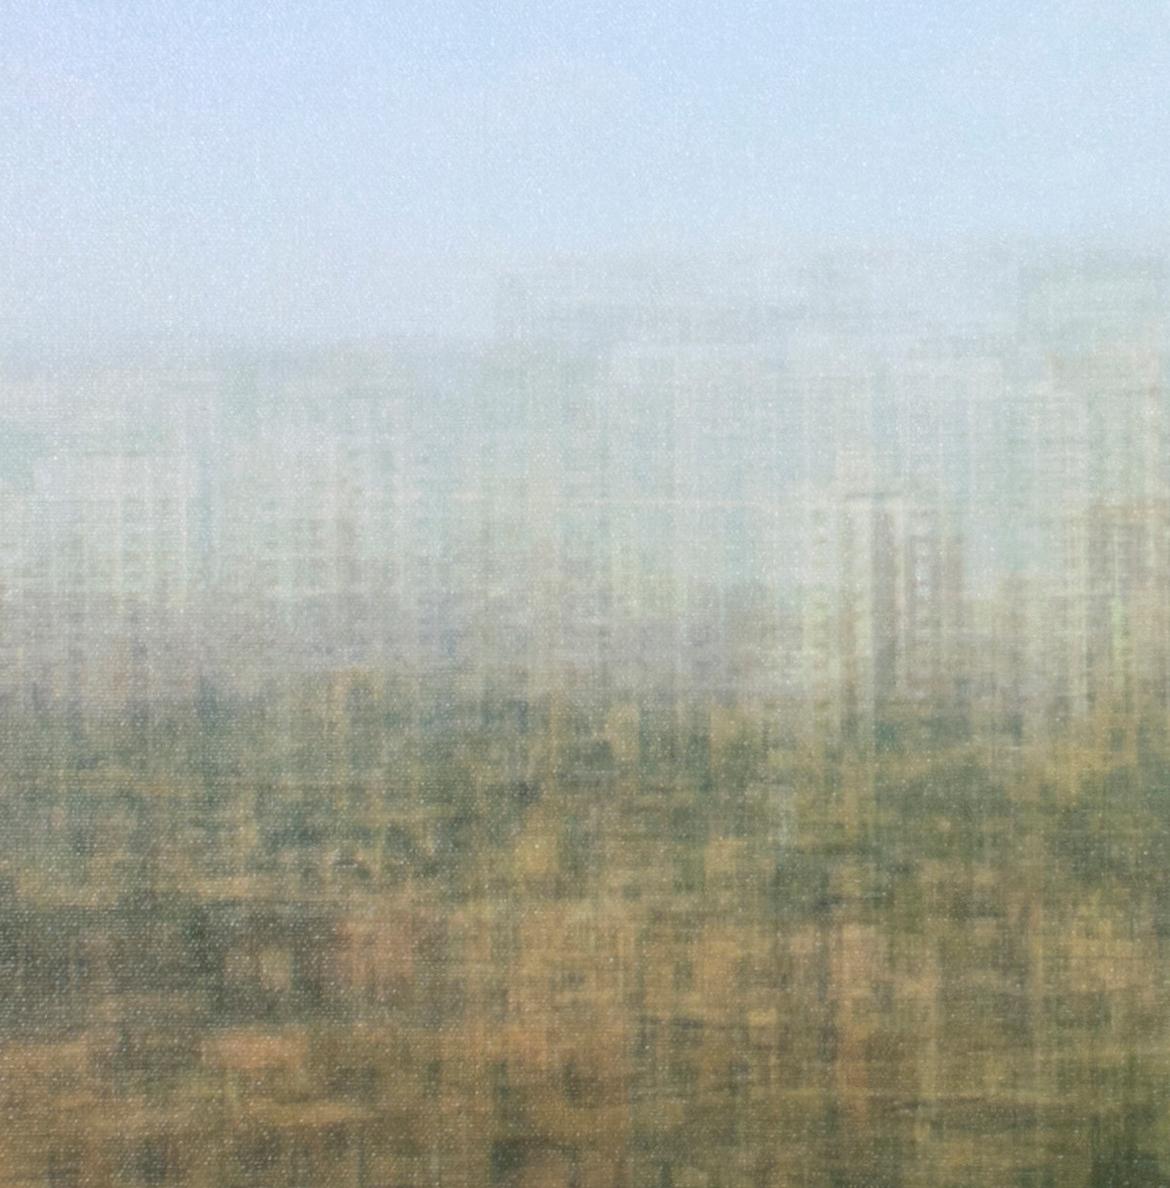 In this image, Jessie Spiess applies her signature multiple-exposure technique to the City of Milwaukee, emphasizing its many tall buildings. She often turns her camera to views of such iconic vistas, her technique emphasizing the limitations of